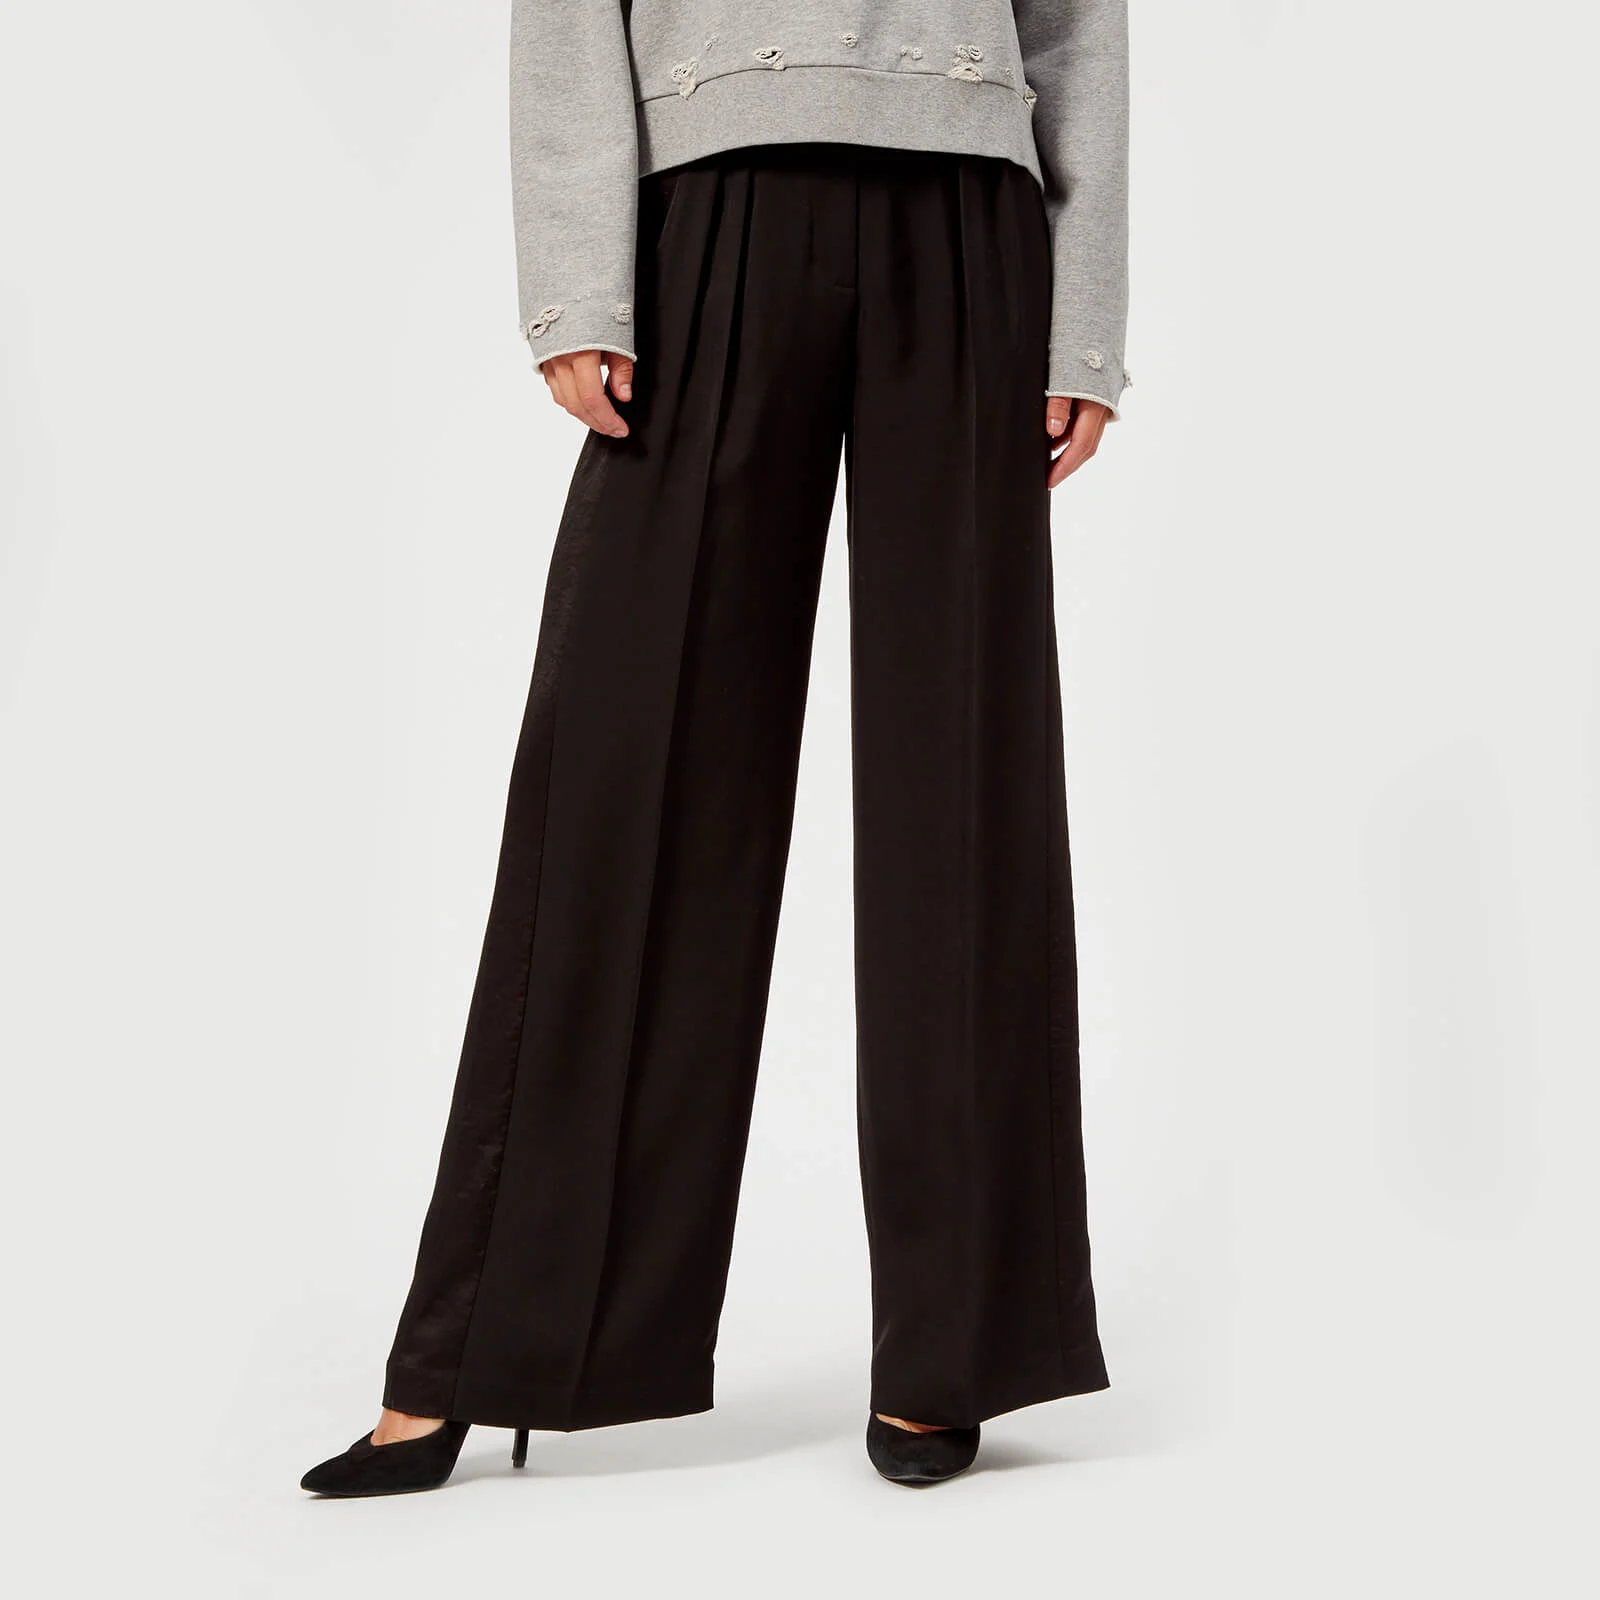 T by Alexander Wang Women's Draped Twill Suiting Wide Leg Pants - Black Image 1